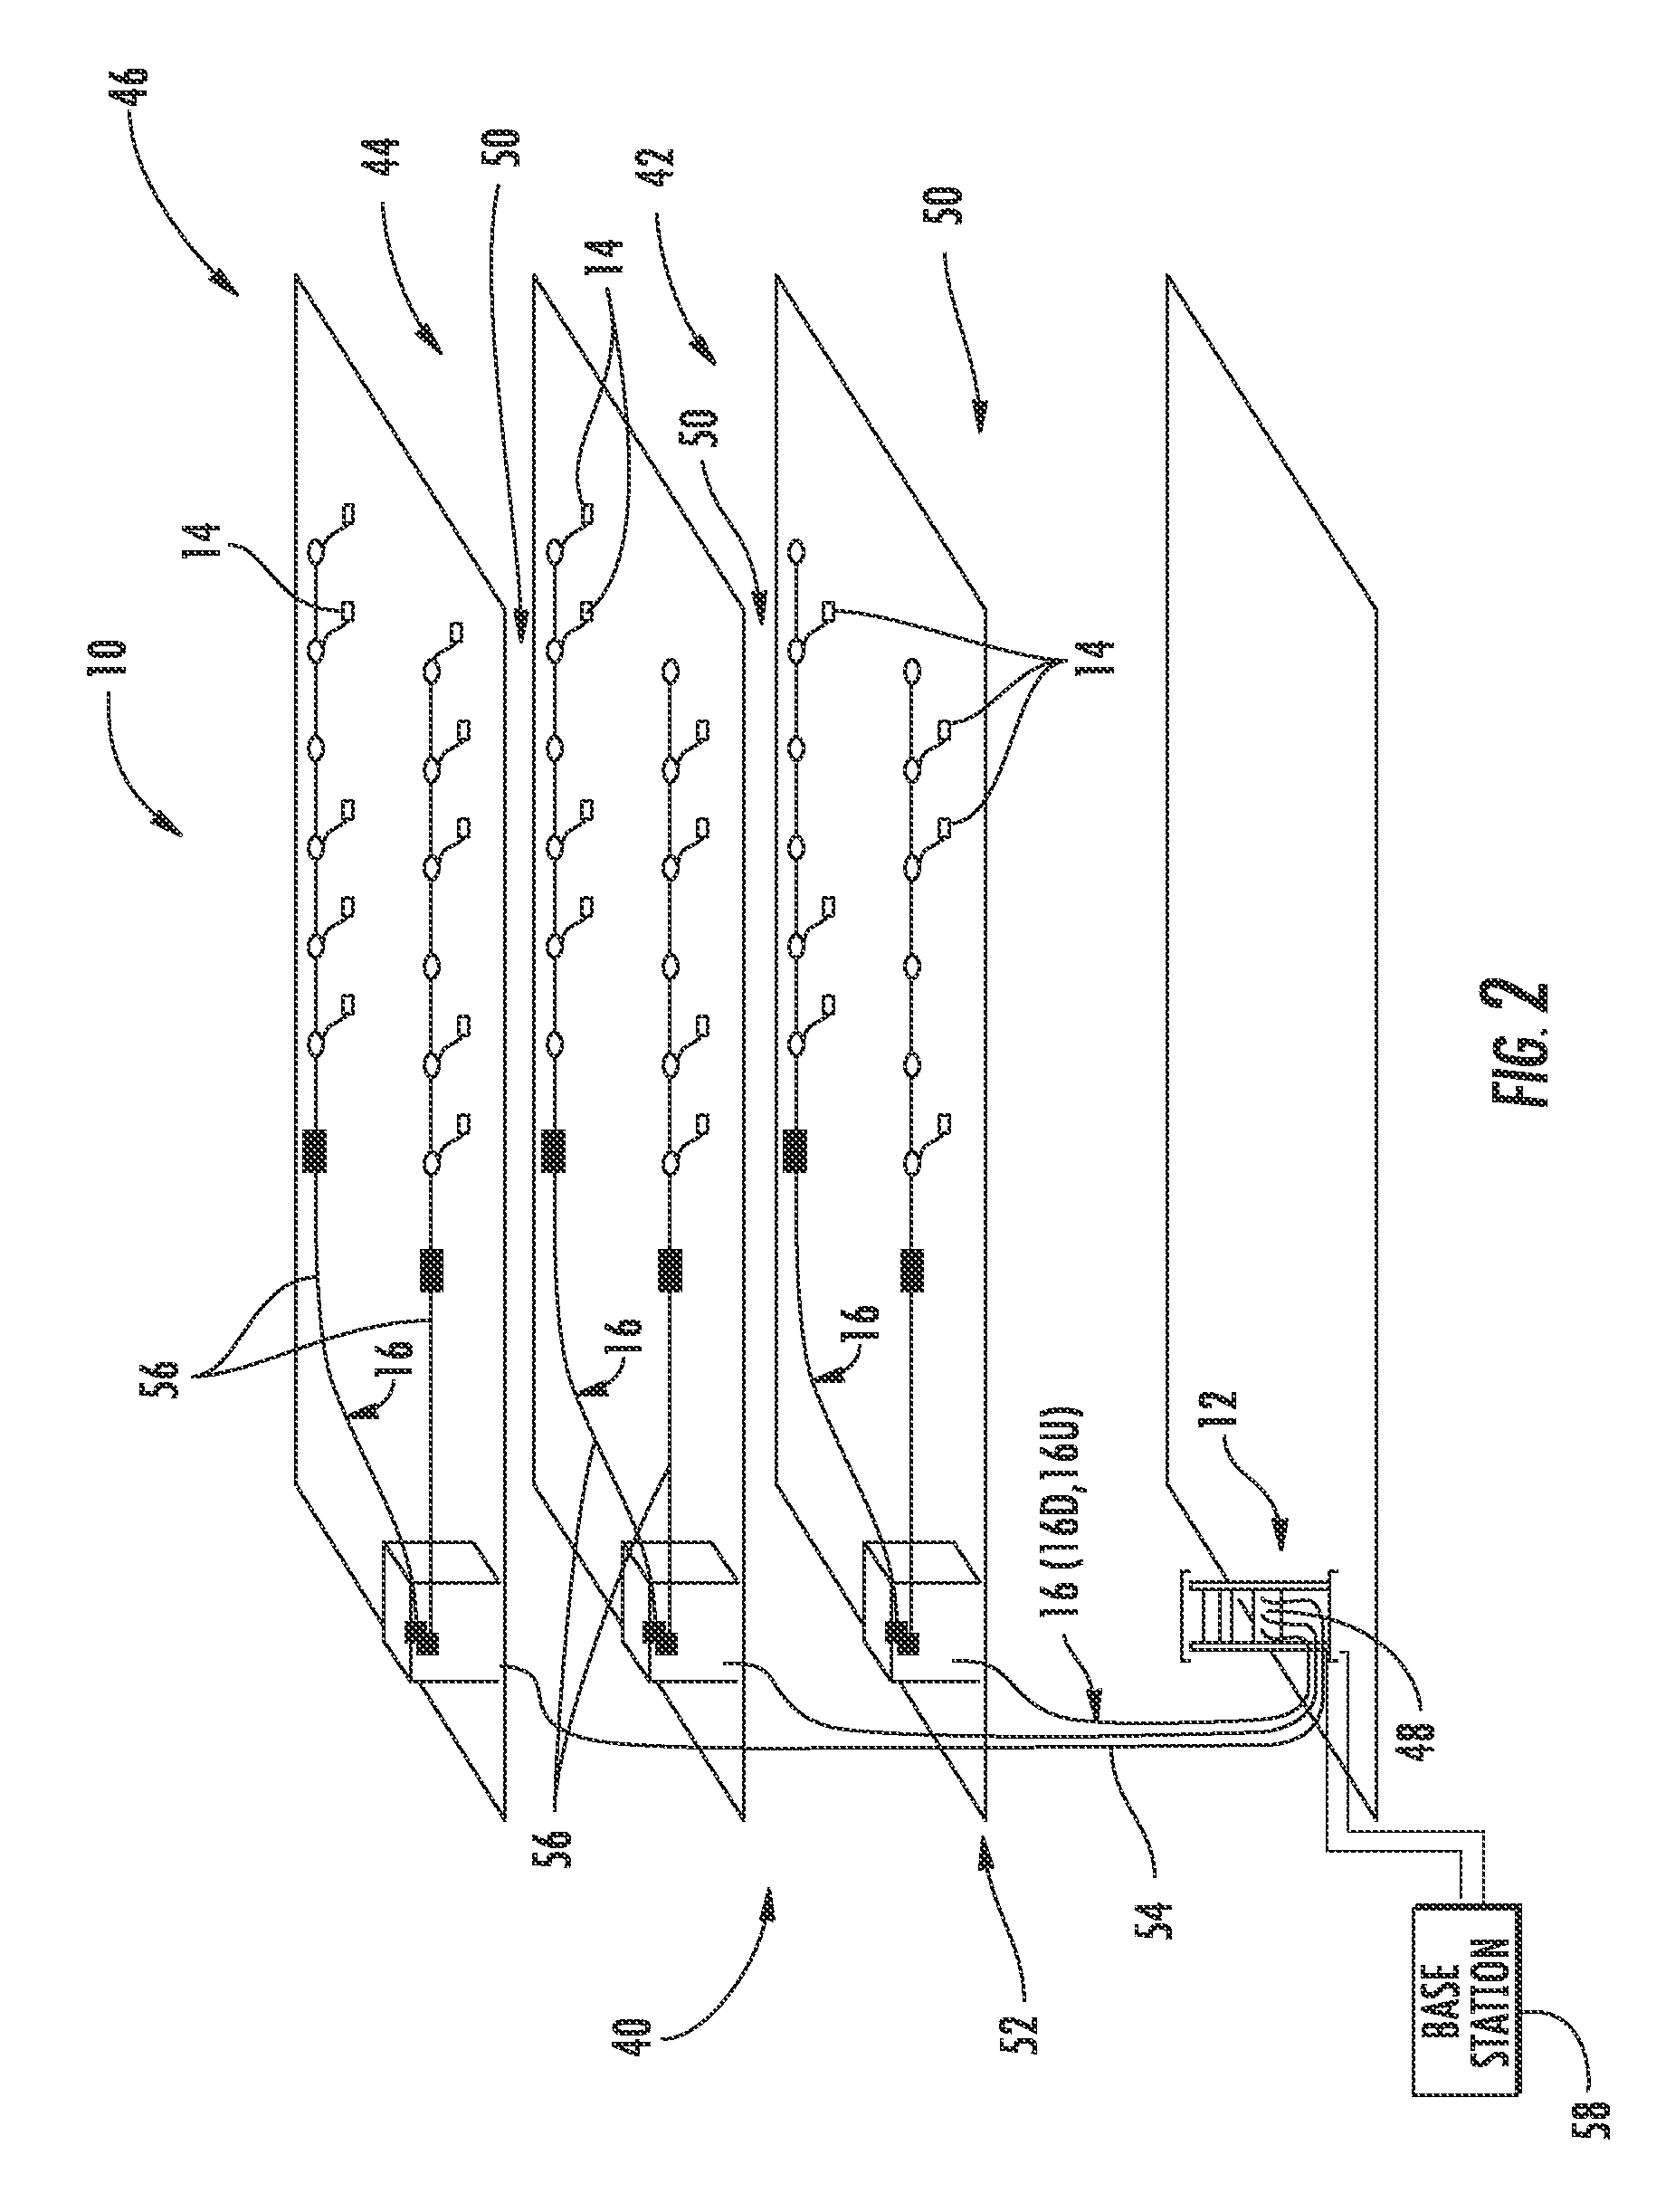 Apparatuses, systems, and methods for determining location of a mobile device(s) in a distributed antenna system(s)